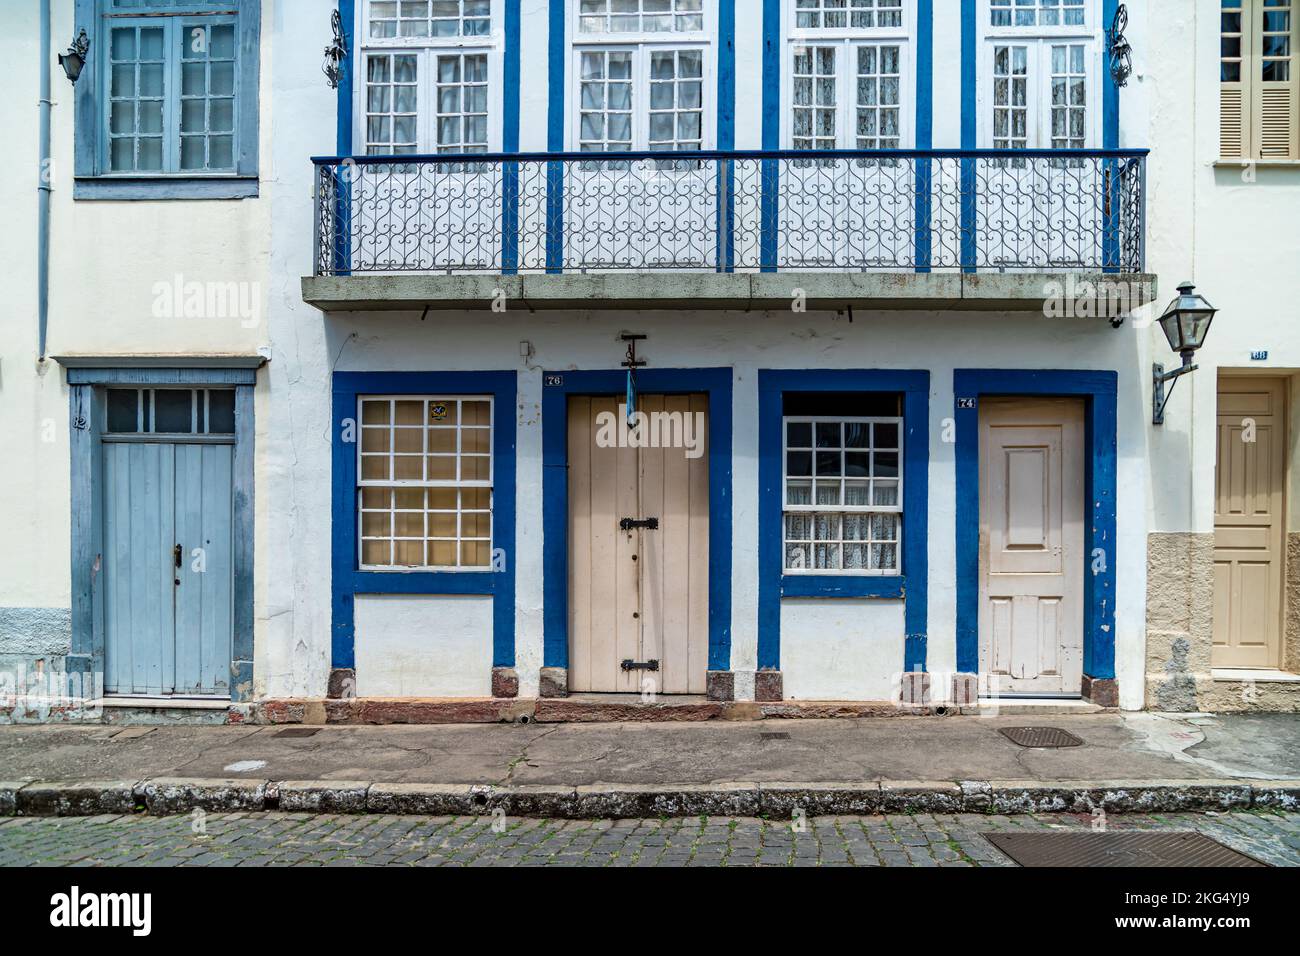 house facades of small towns in south america Stock Photo